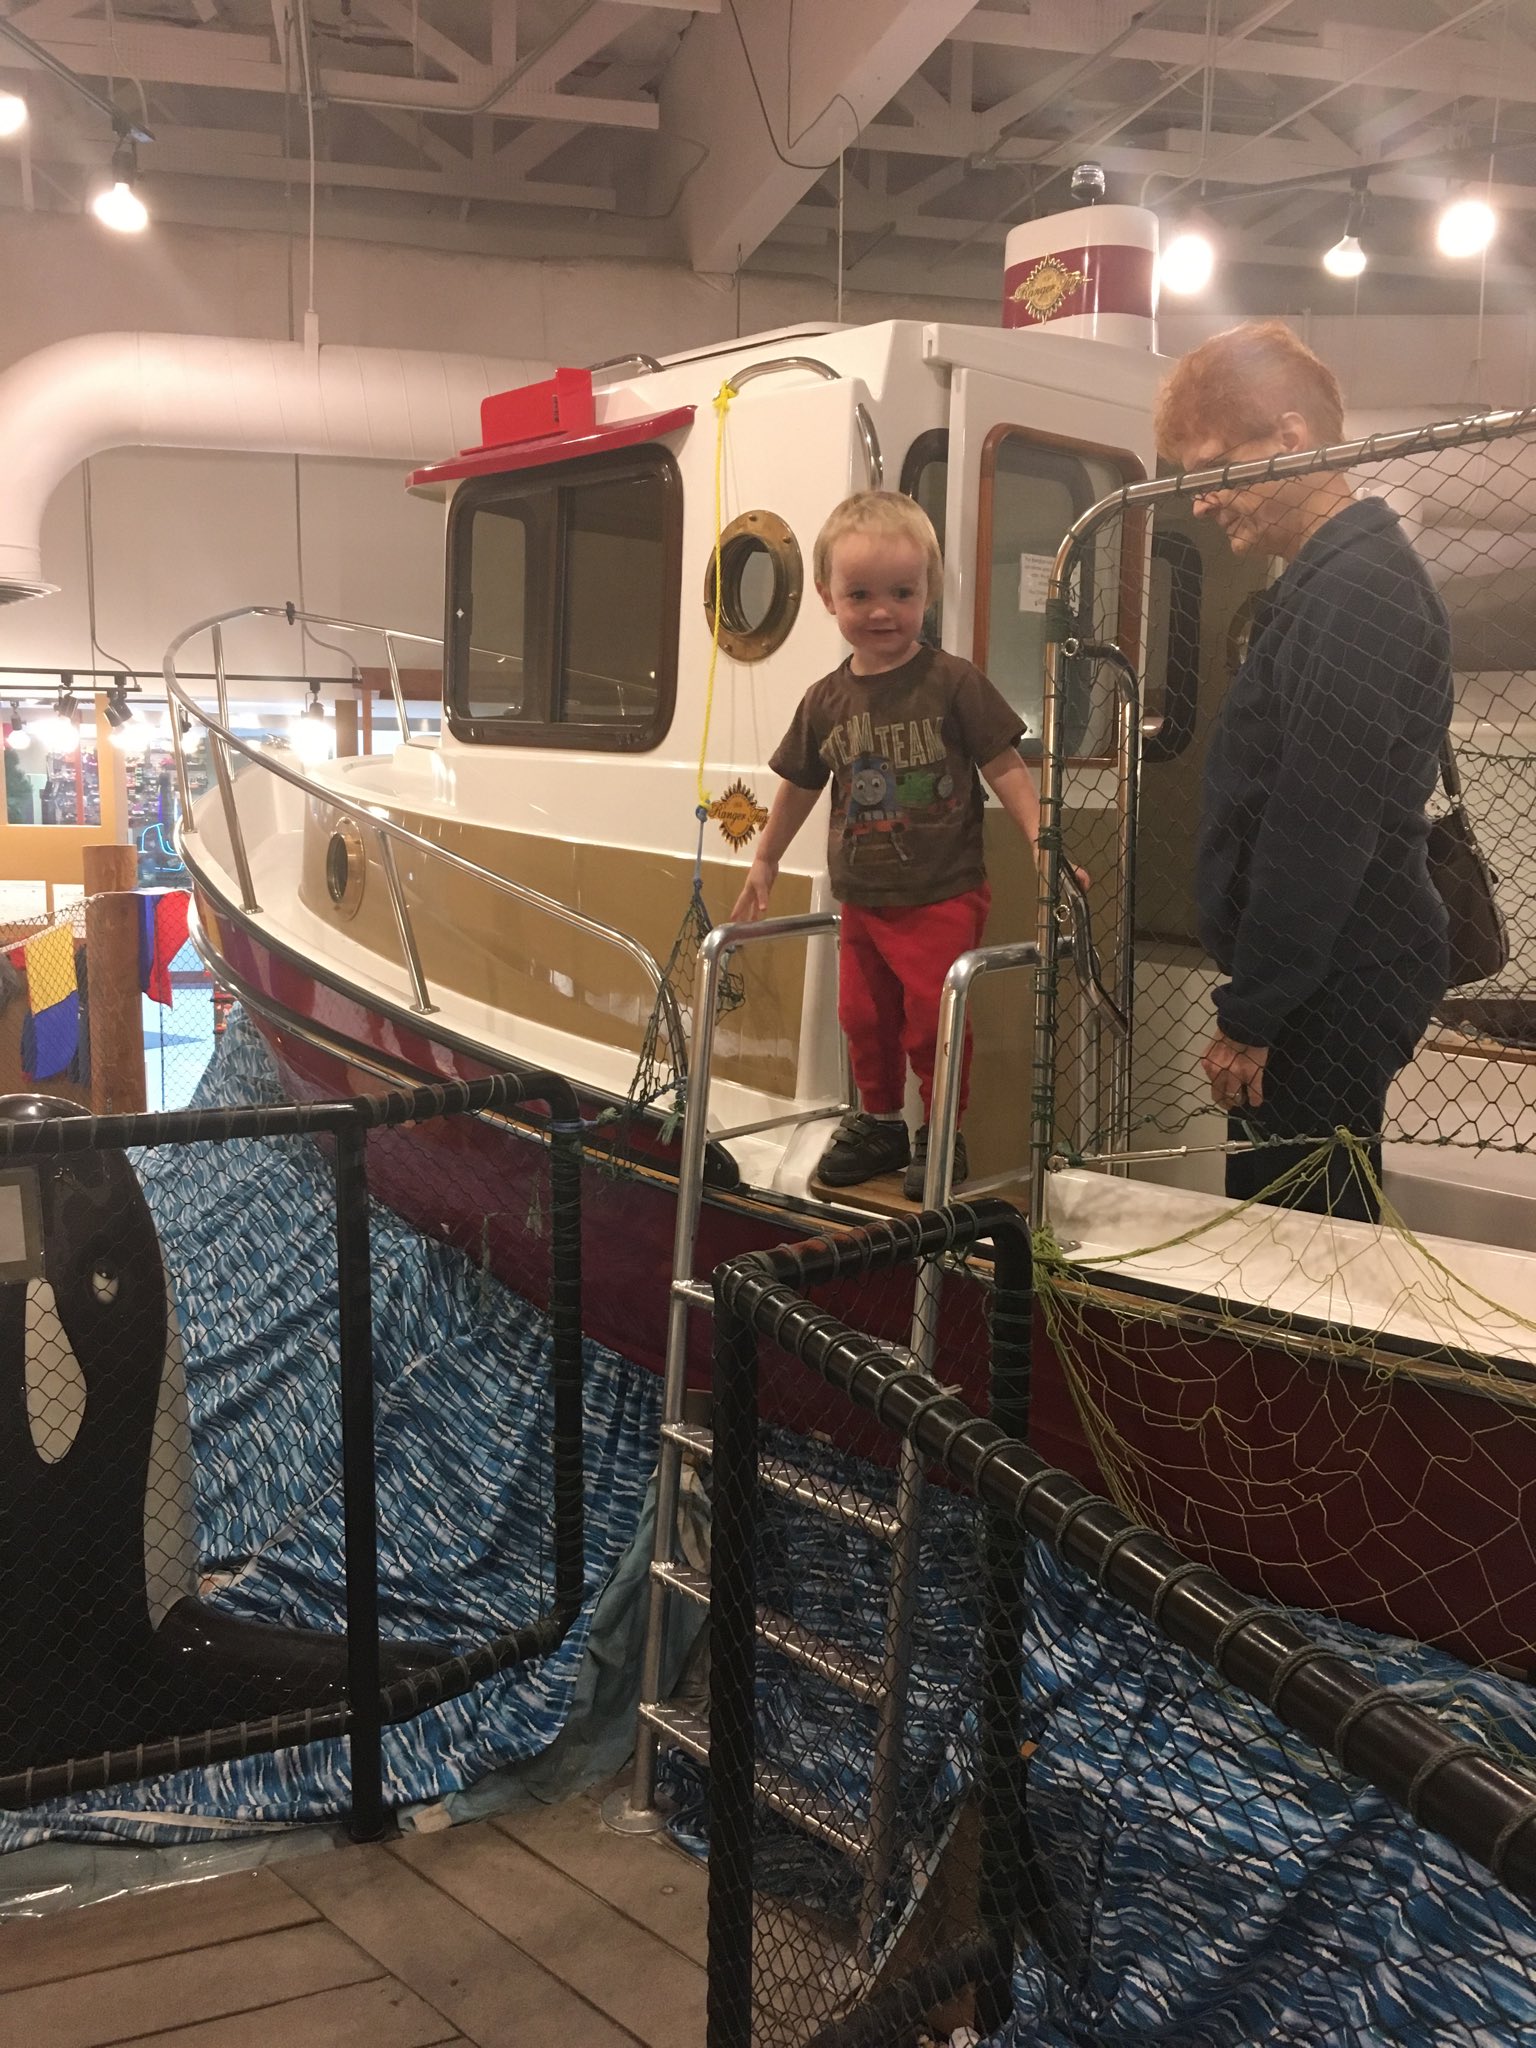 Julian stands on a fishing boat in a museum exhibit. Grandma stands behind him.